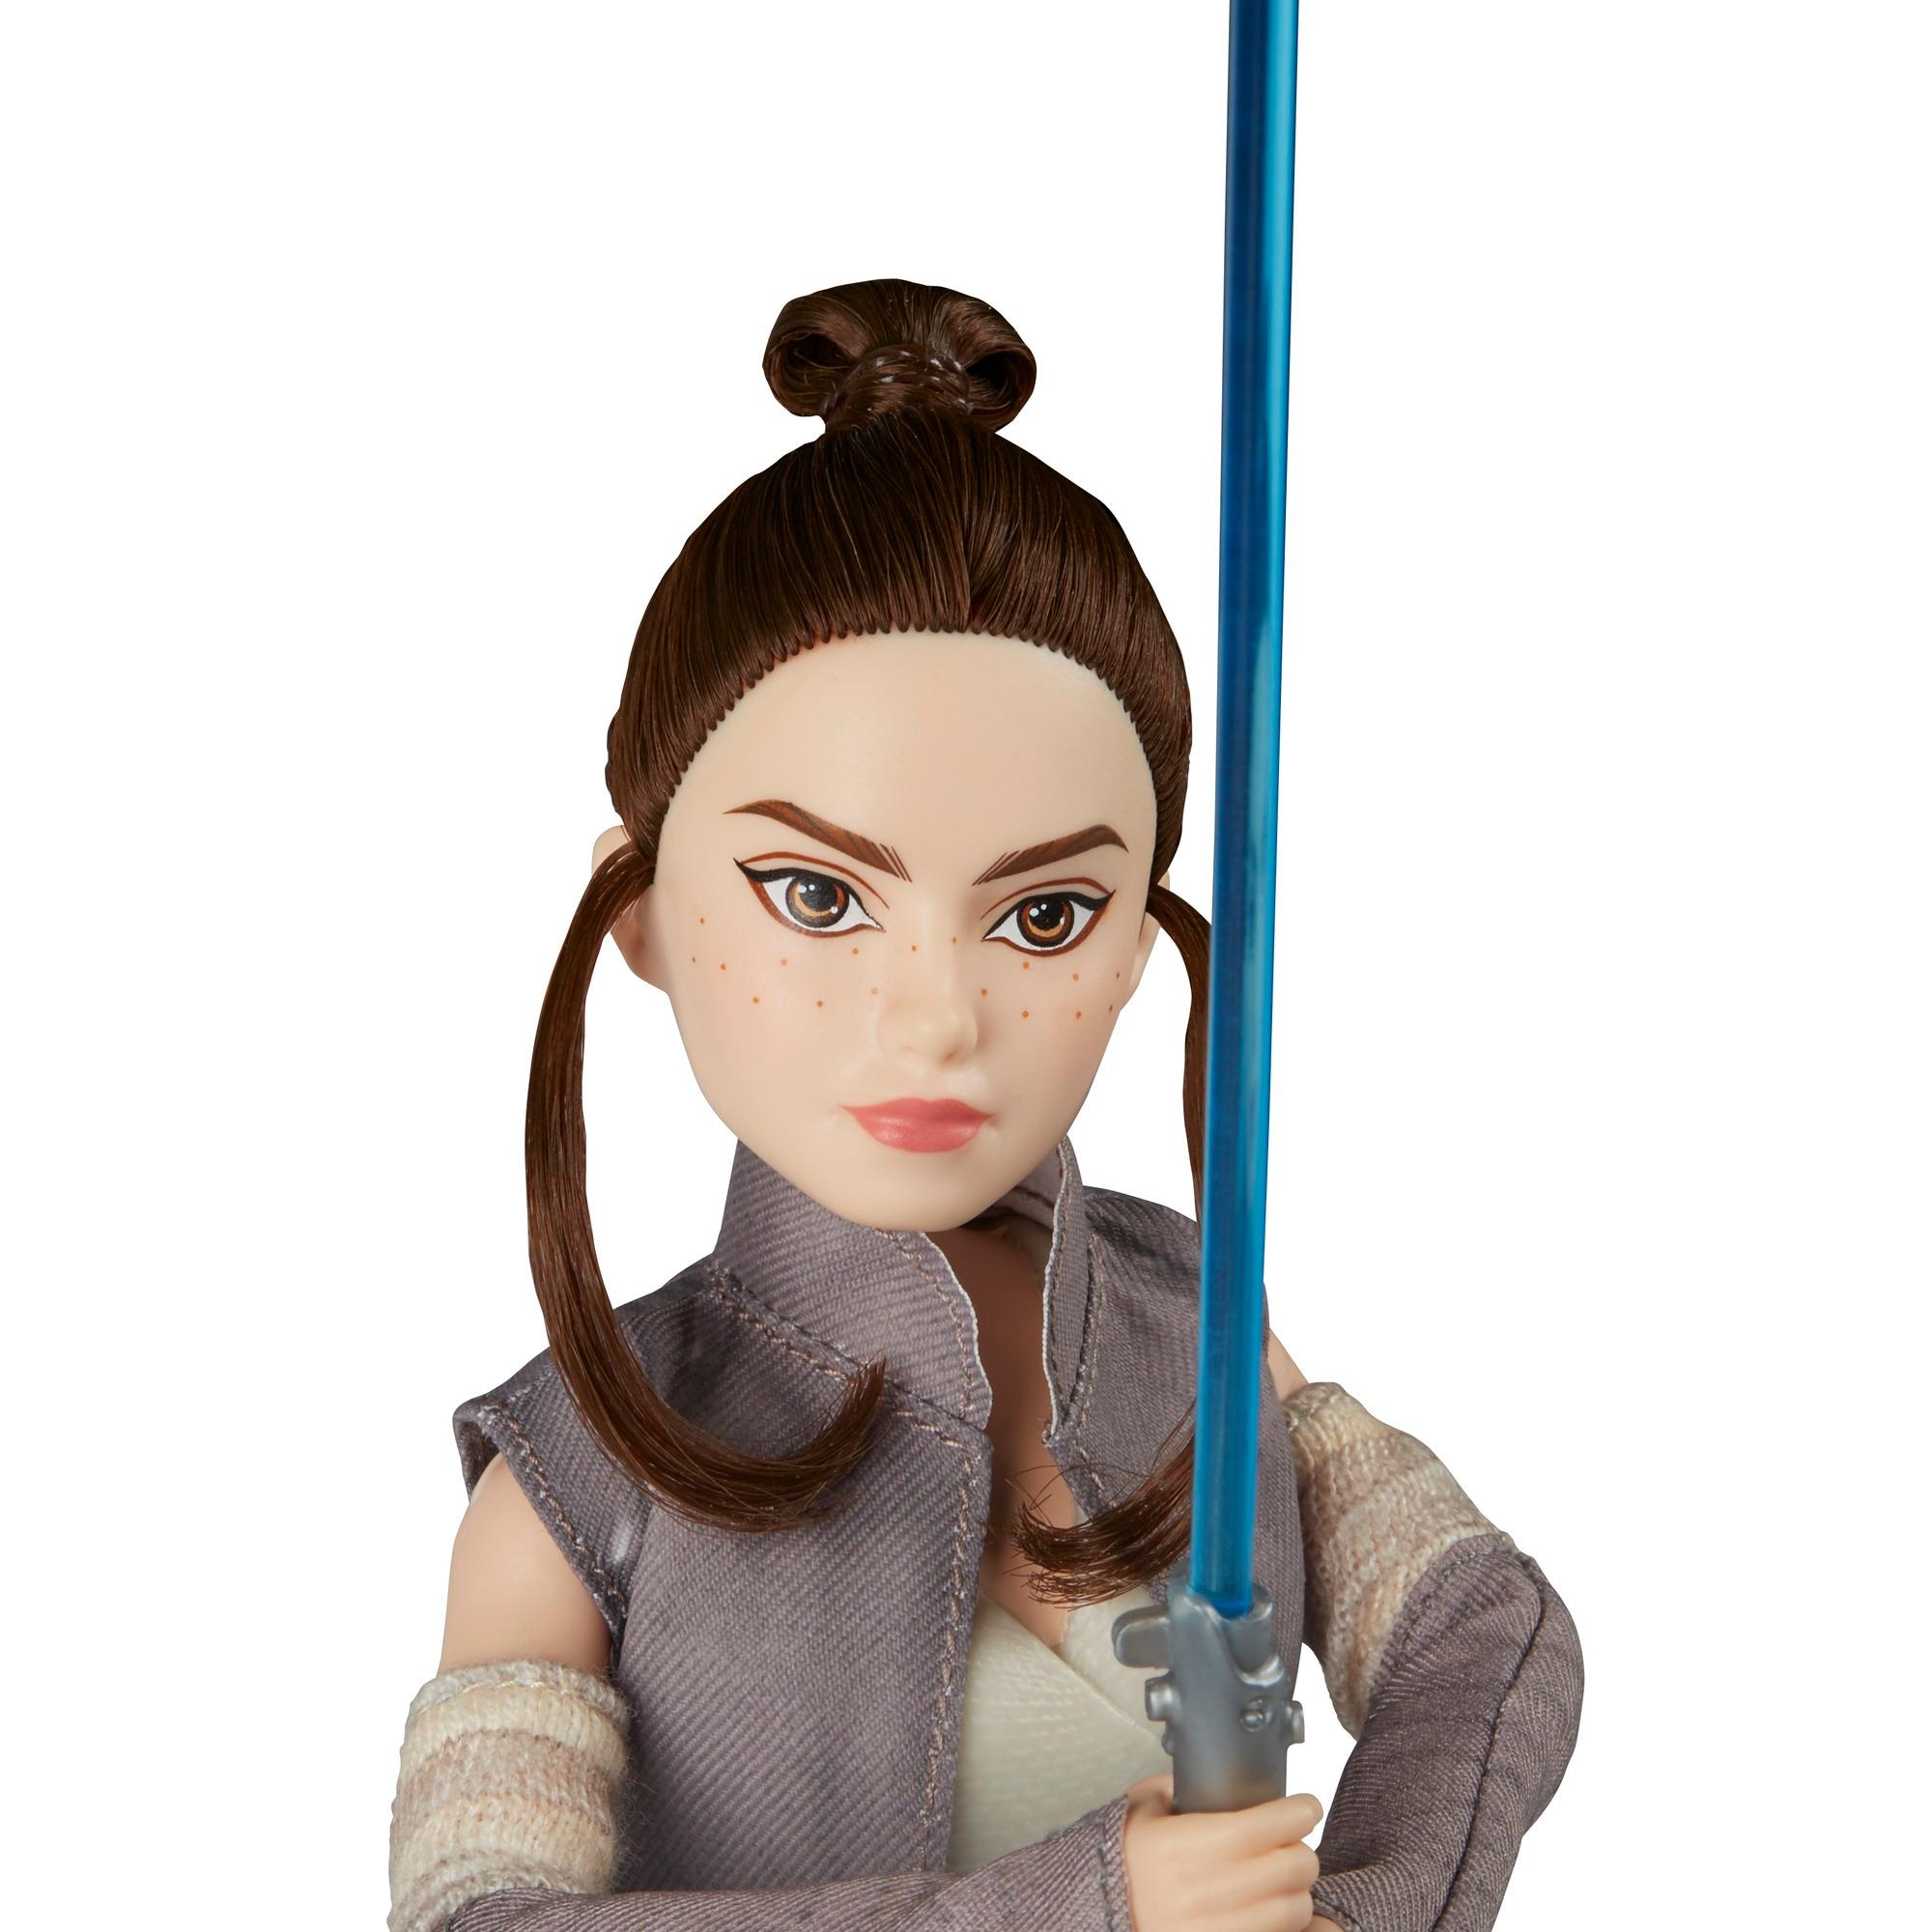 New Star Wars Forces of Destiny Rey & BB-8 11" Action Figure 